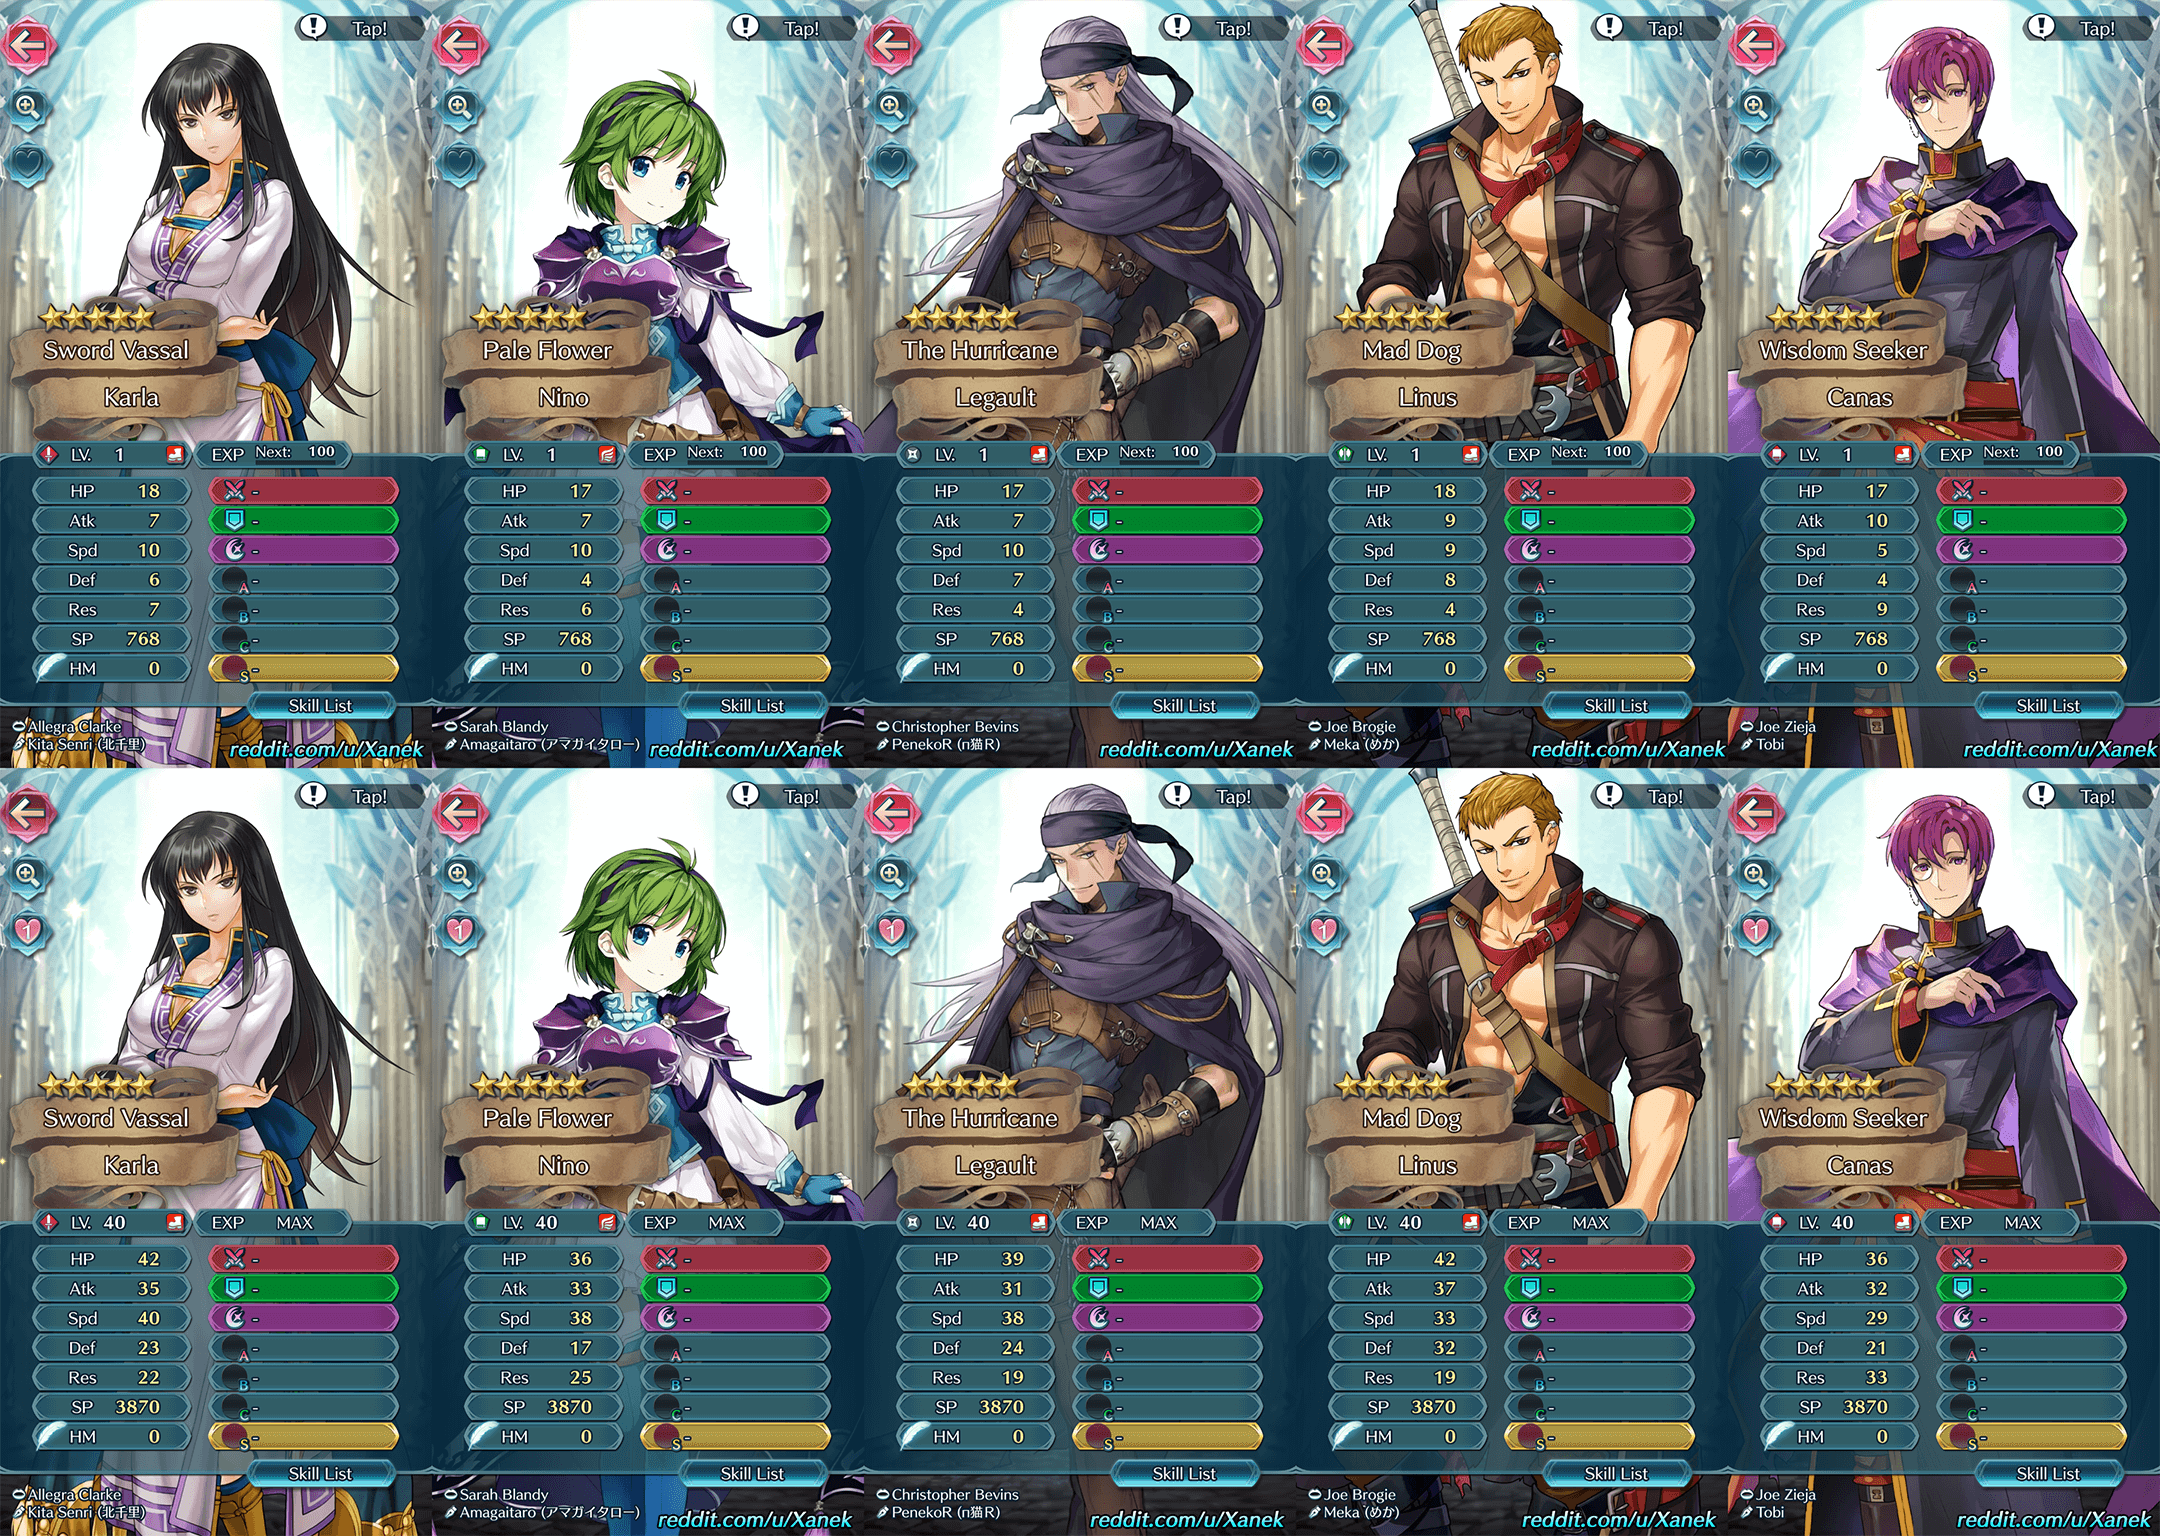 FEH Content Update: 06/07/18 - Version 2.6.0 / Scattered Fangs Fire Emblem ...